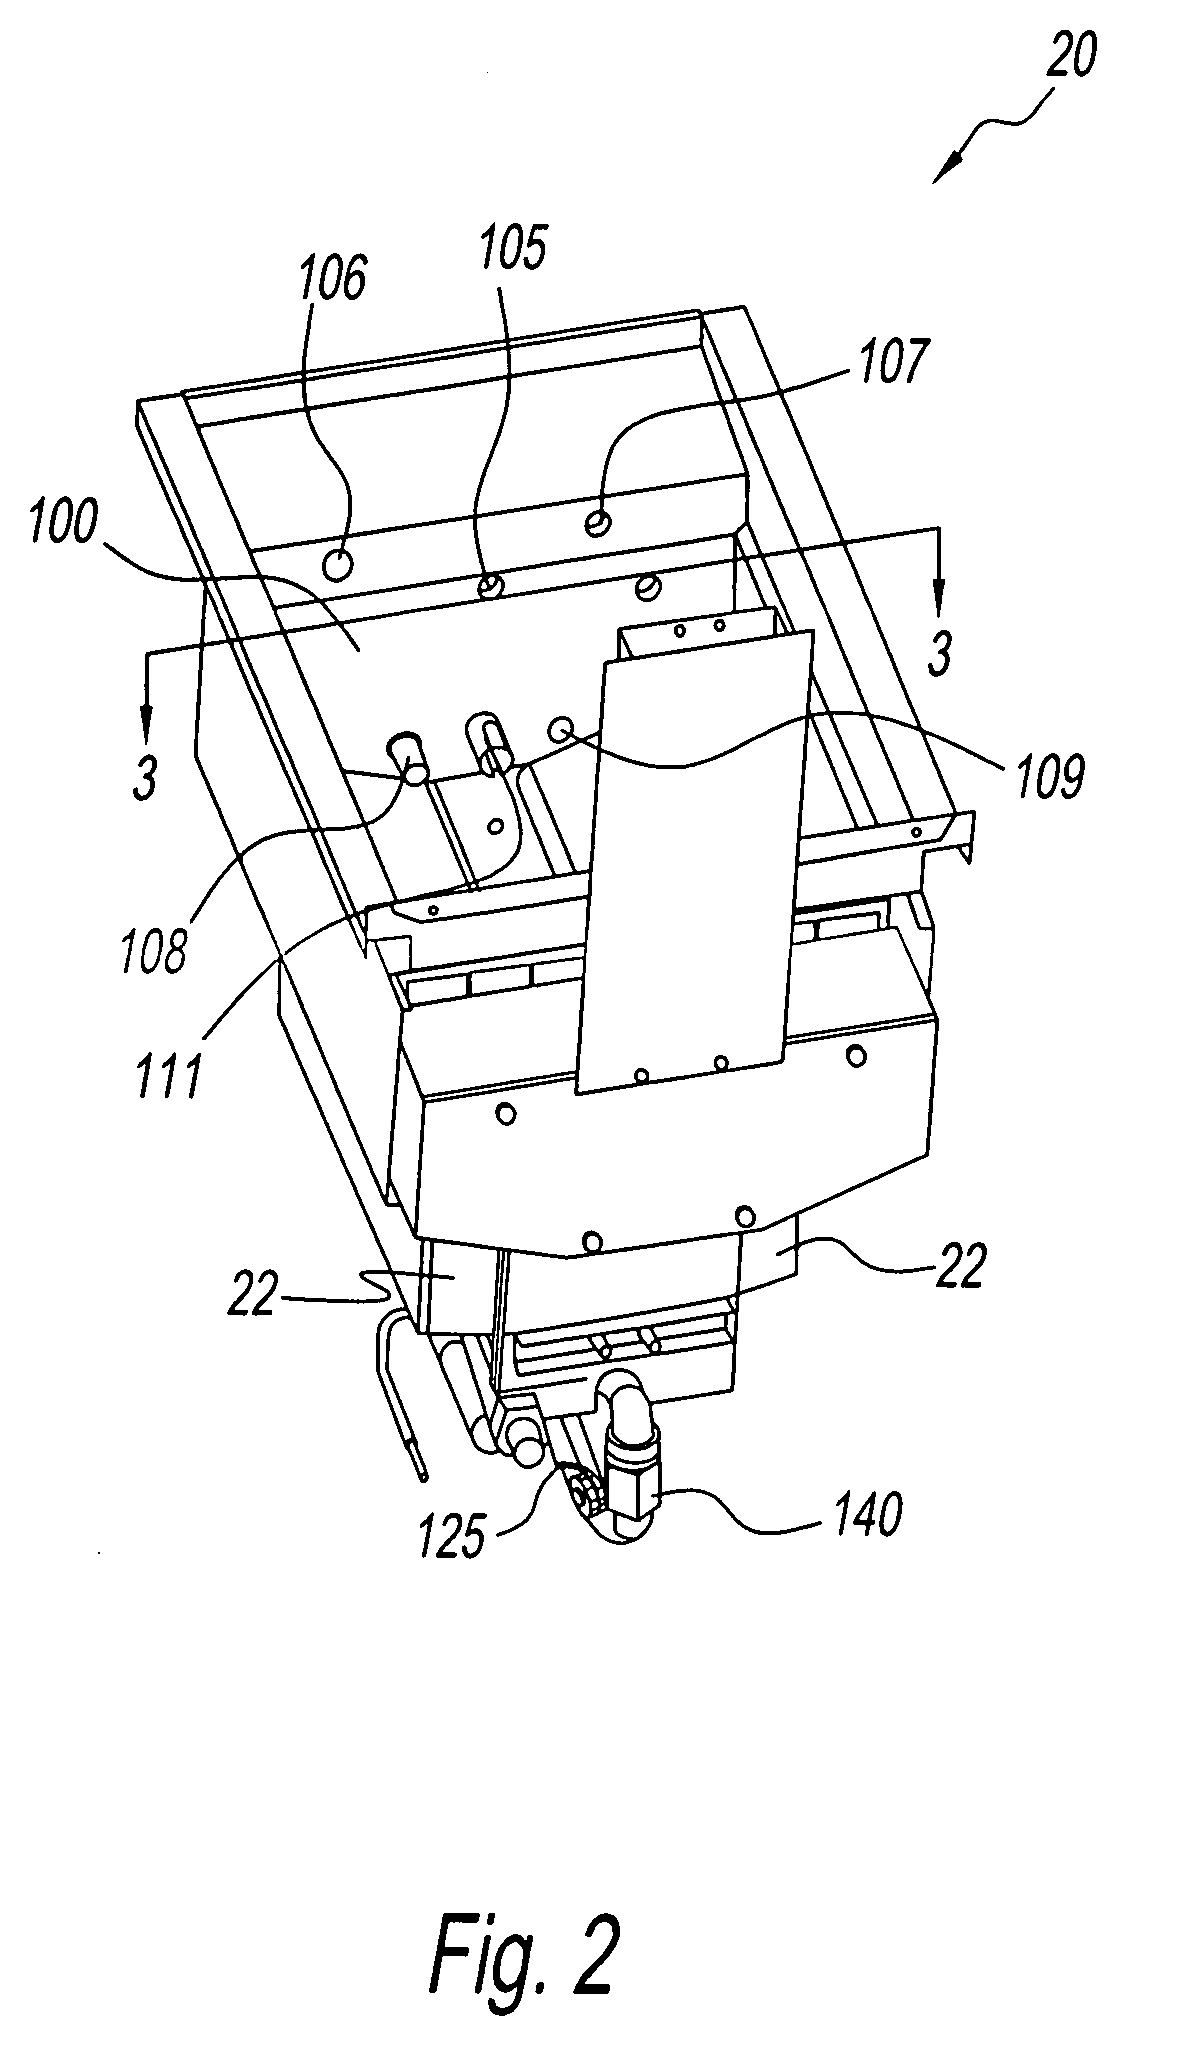 Low oil volume fryer with automatic filtration and top-off capability